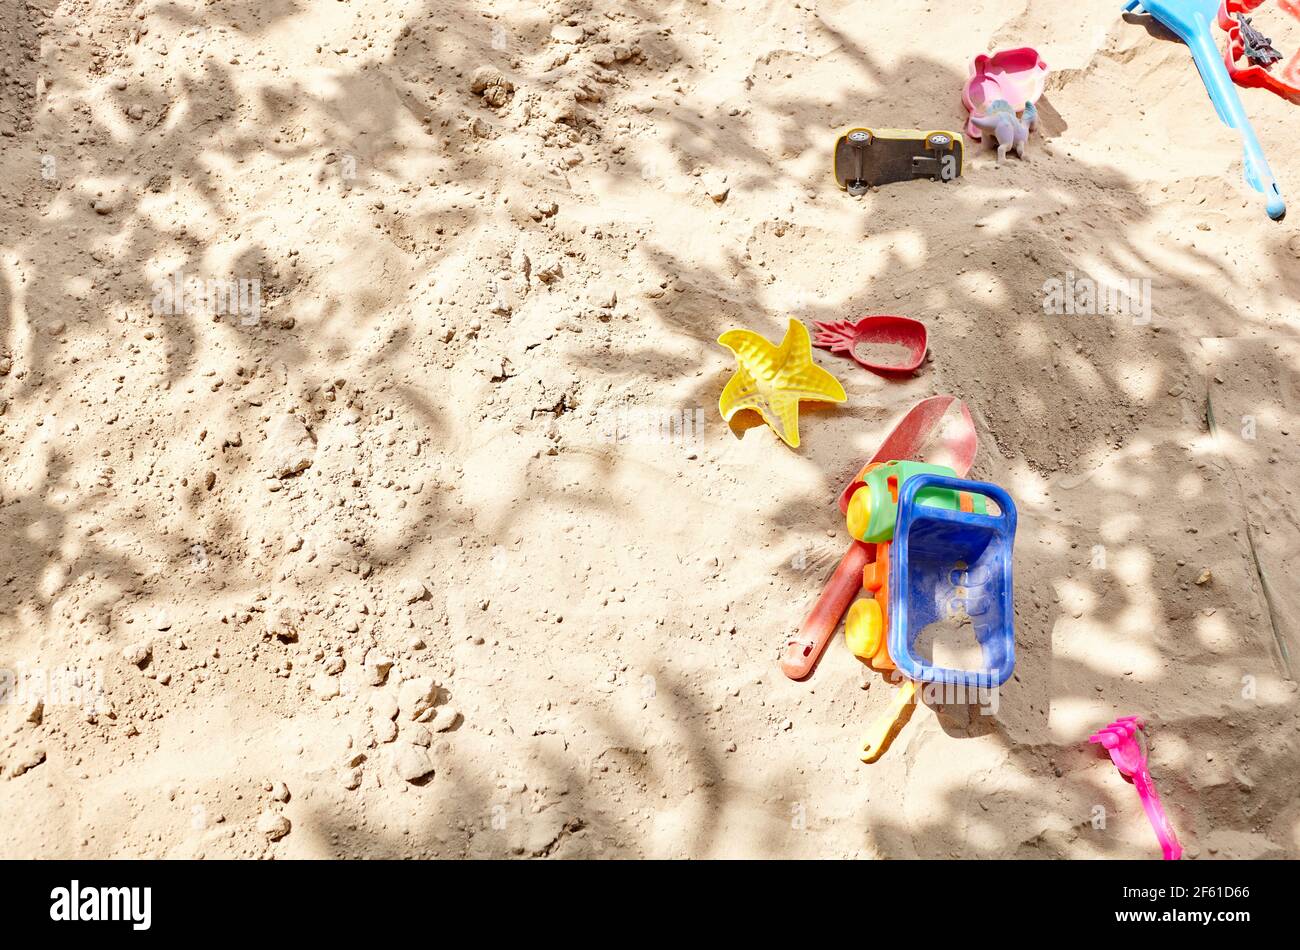 Sandbox outdoor. Children's sandbox with various toys for the game. Summer concept Stock Photo